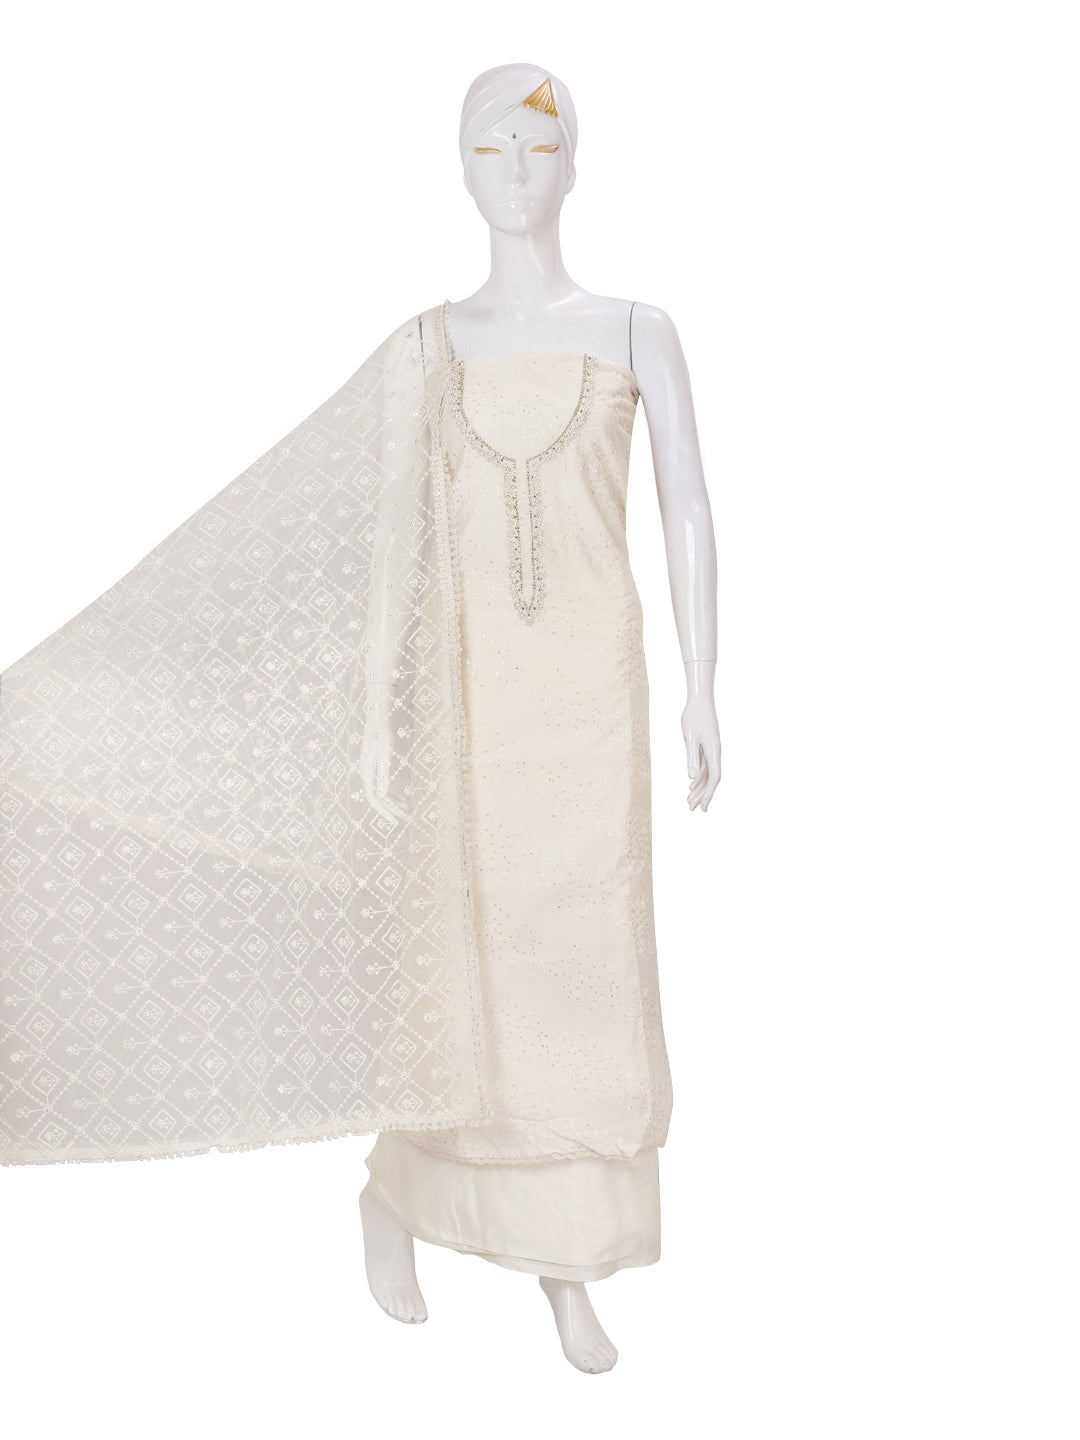 Off White Embellished Unstitch Dress Material with Dupatta